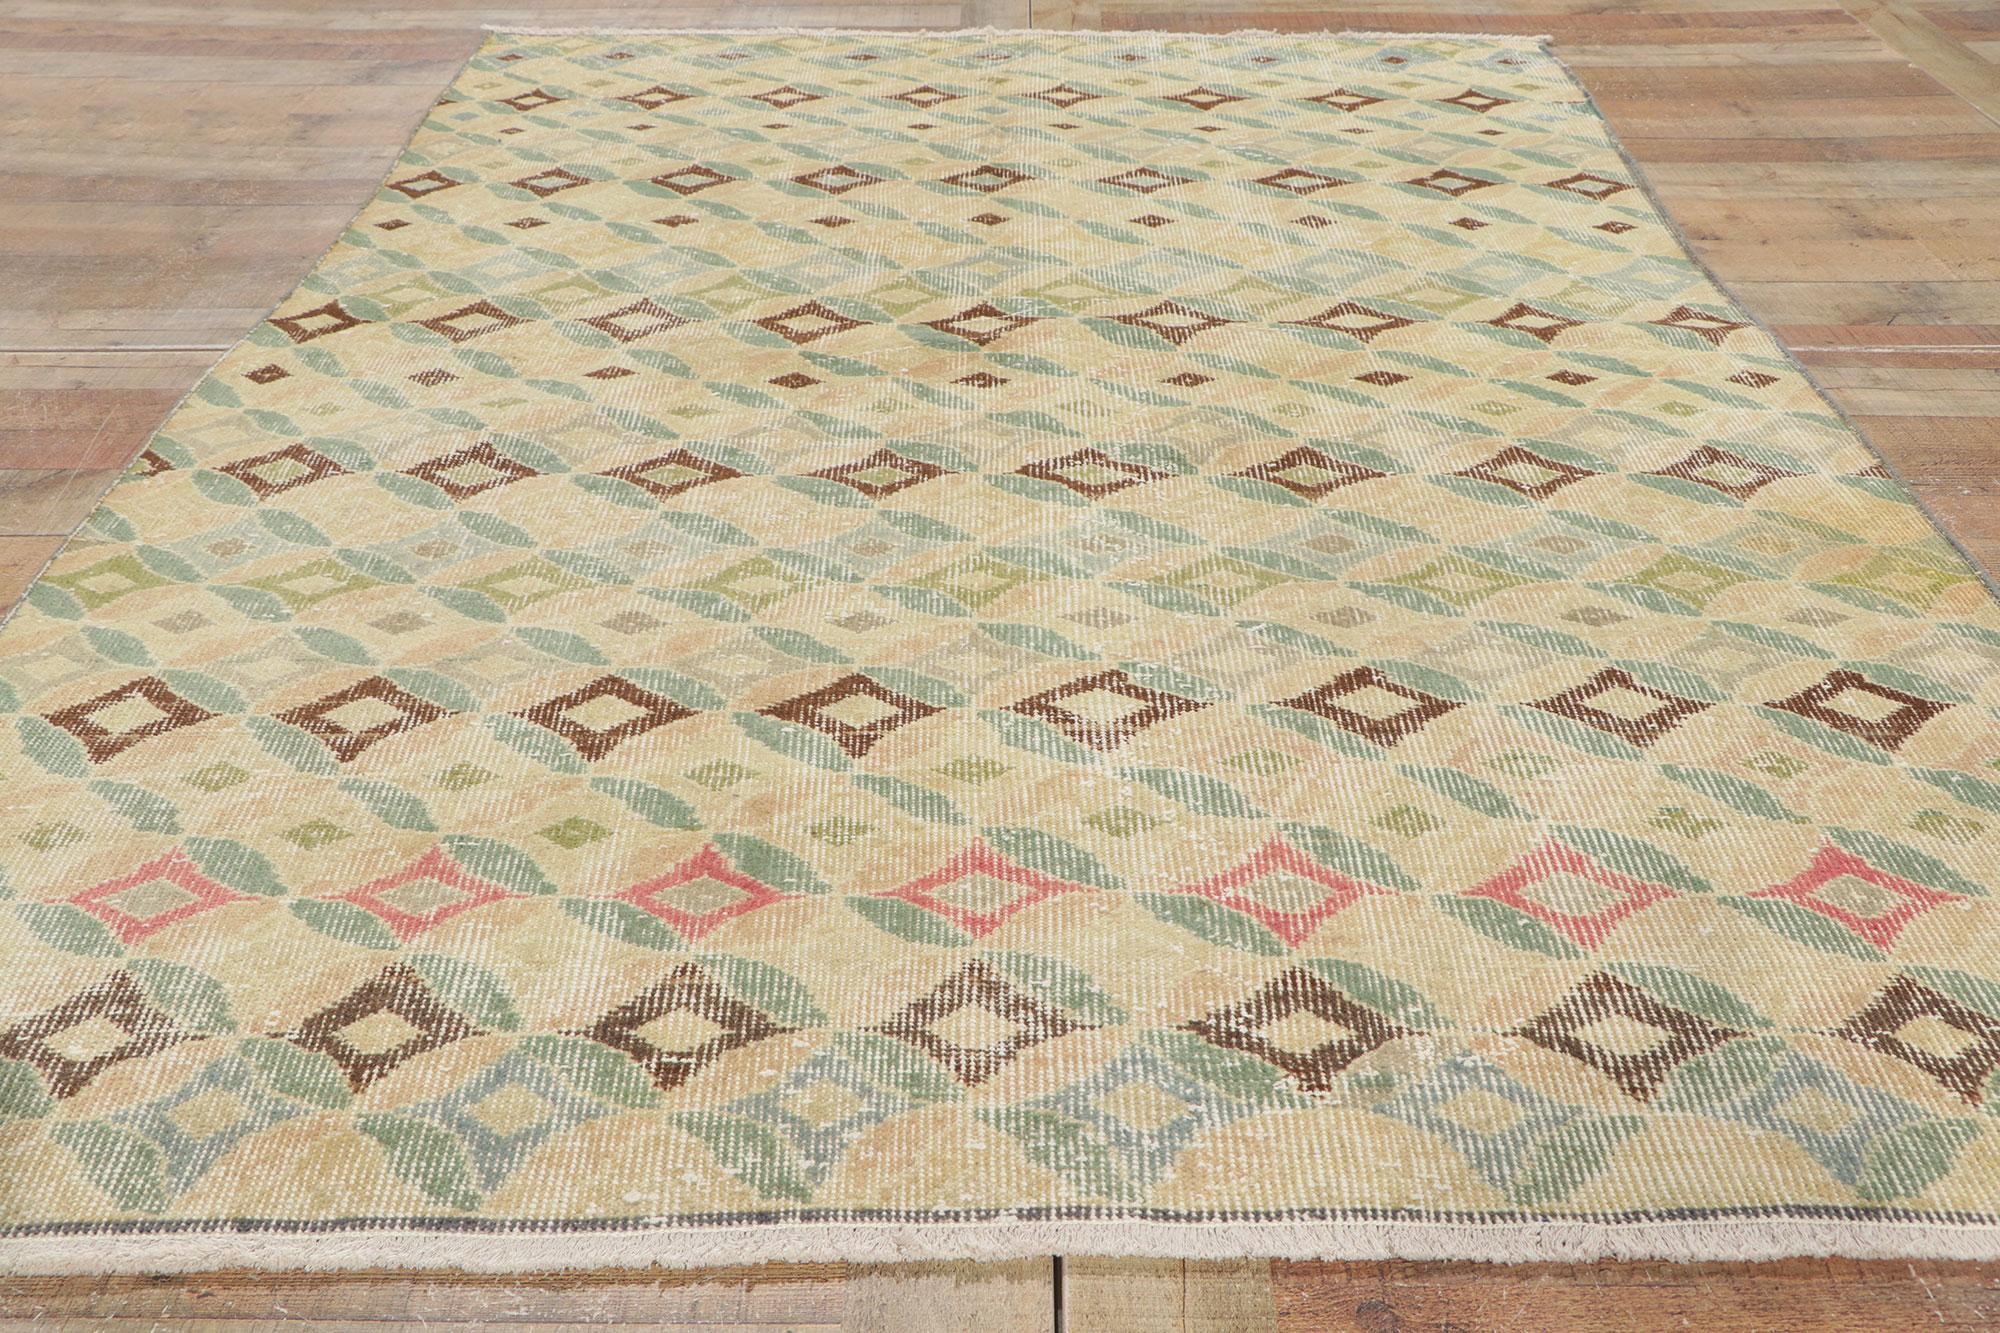 Rustic Vintage Distressed Turkish Sivas Rug with Faded Earth-Tone Colors For Sale 2